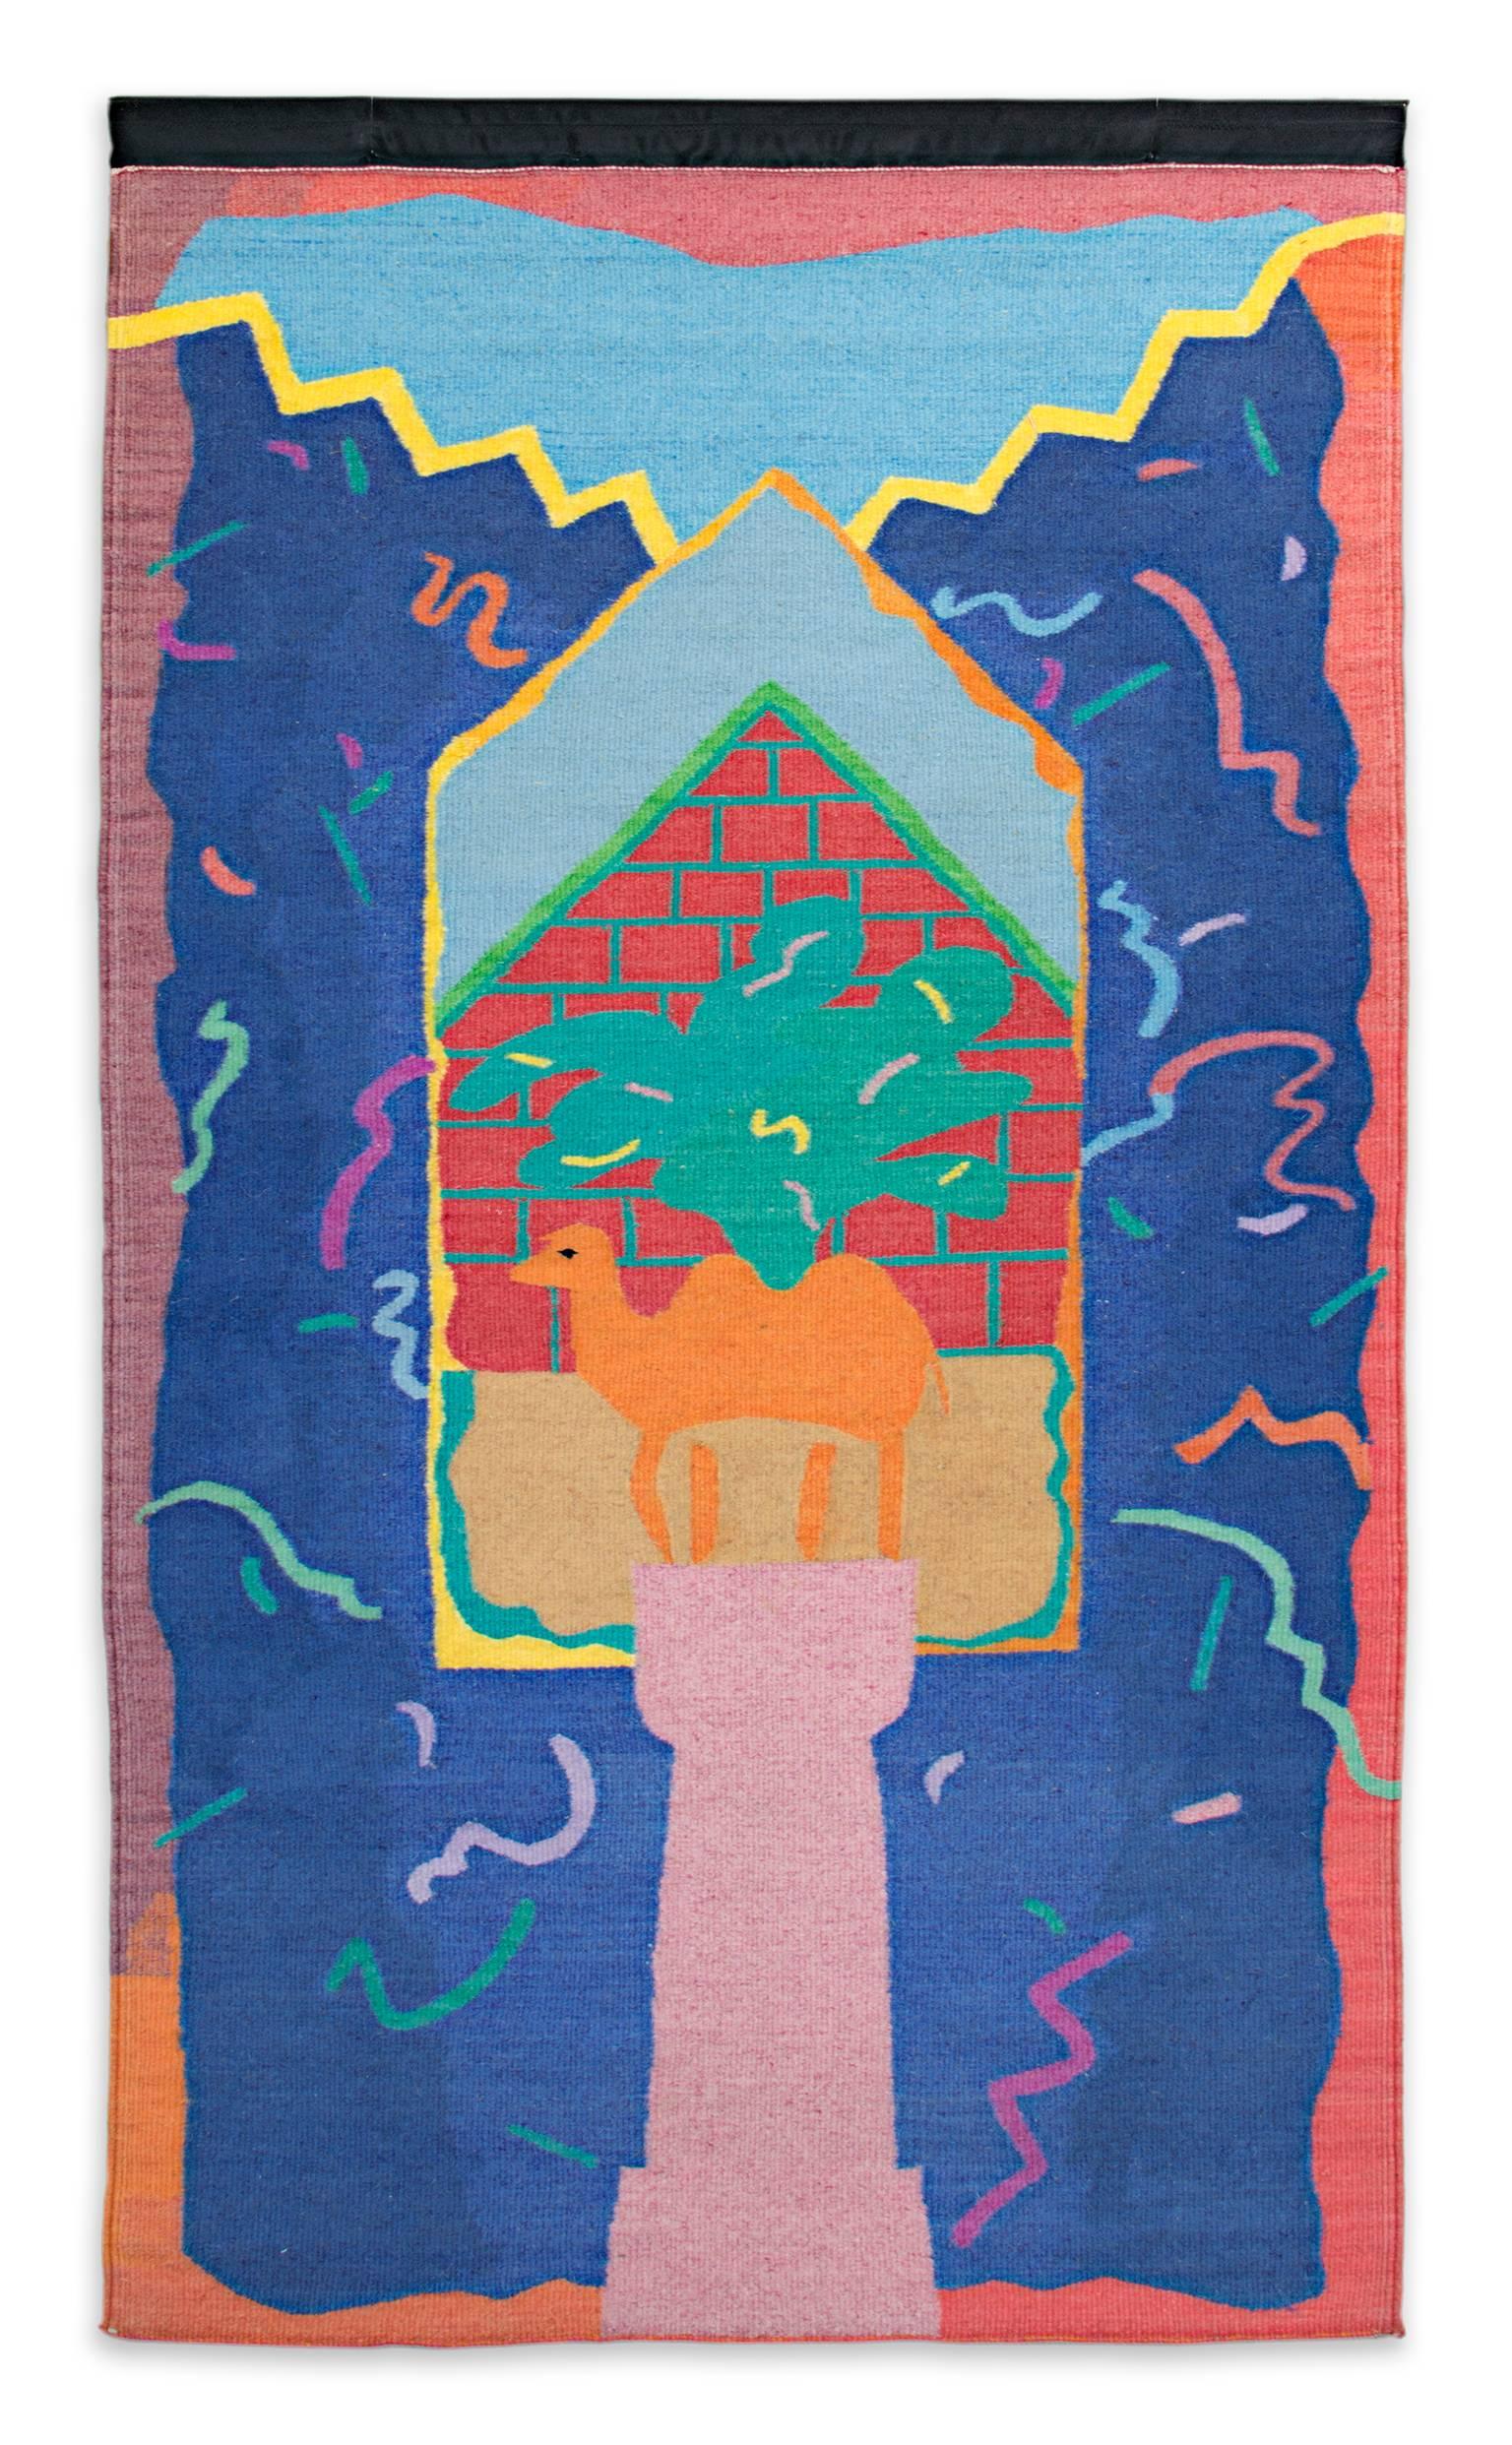 Egyptian Wool Woven Tapestry Bright Colorful Abstract Contemporary Prayer World - Art by Joan Ward Summers